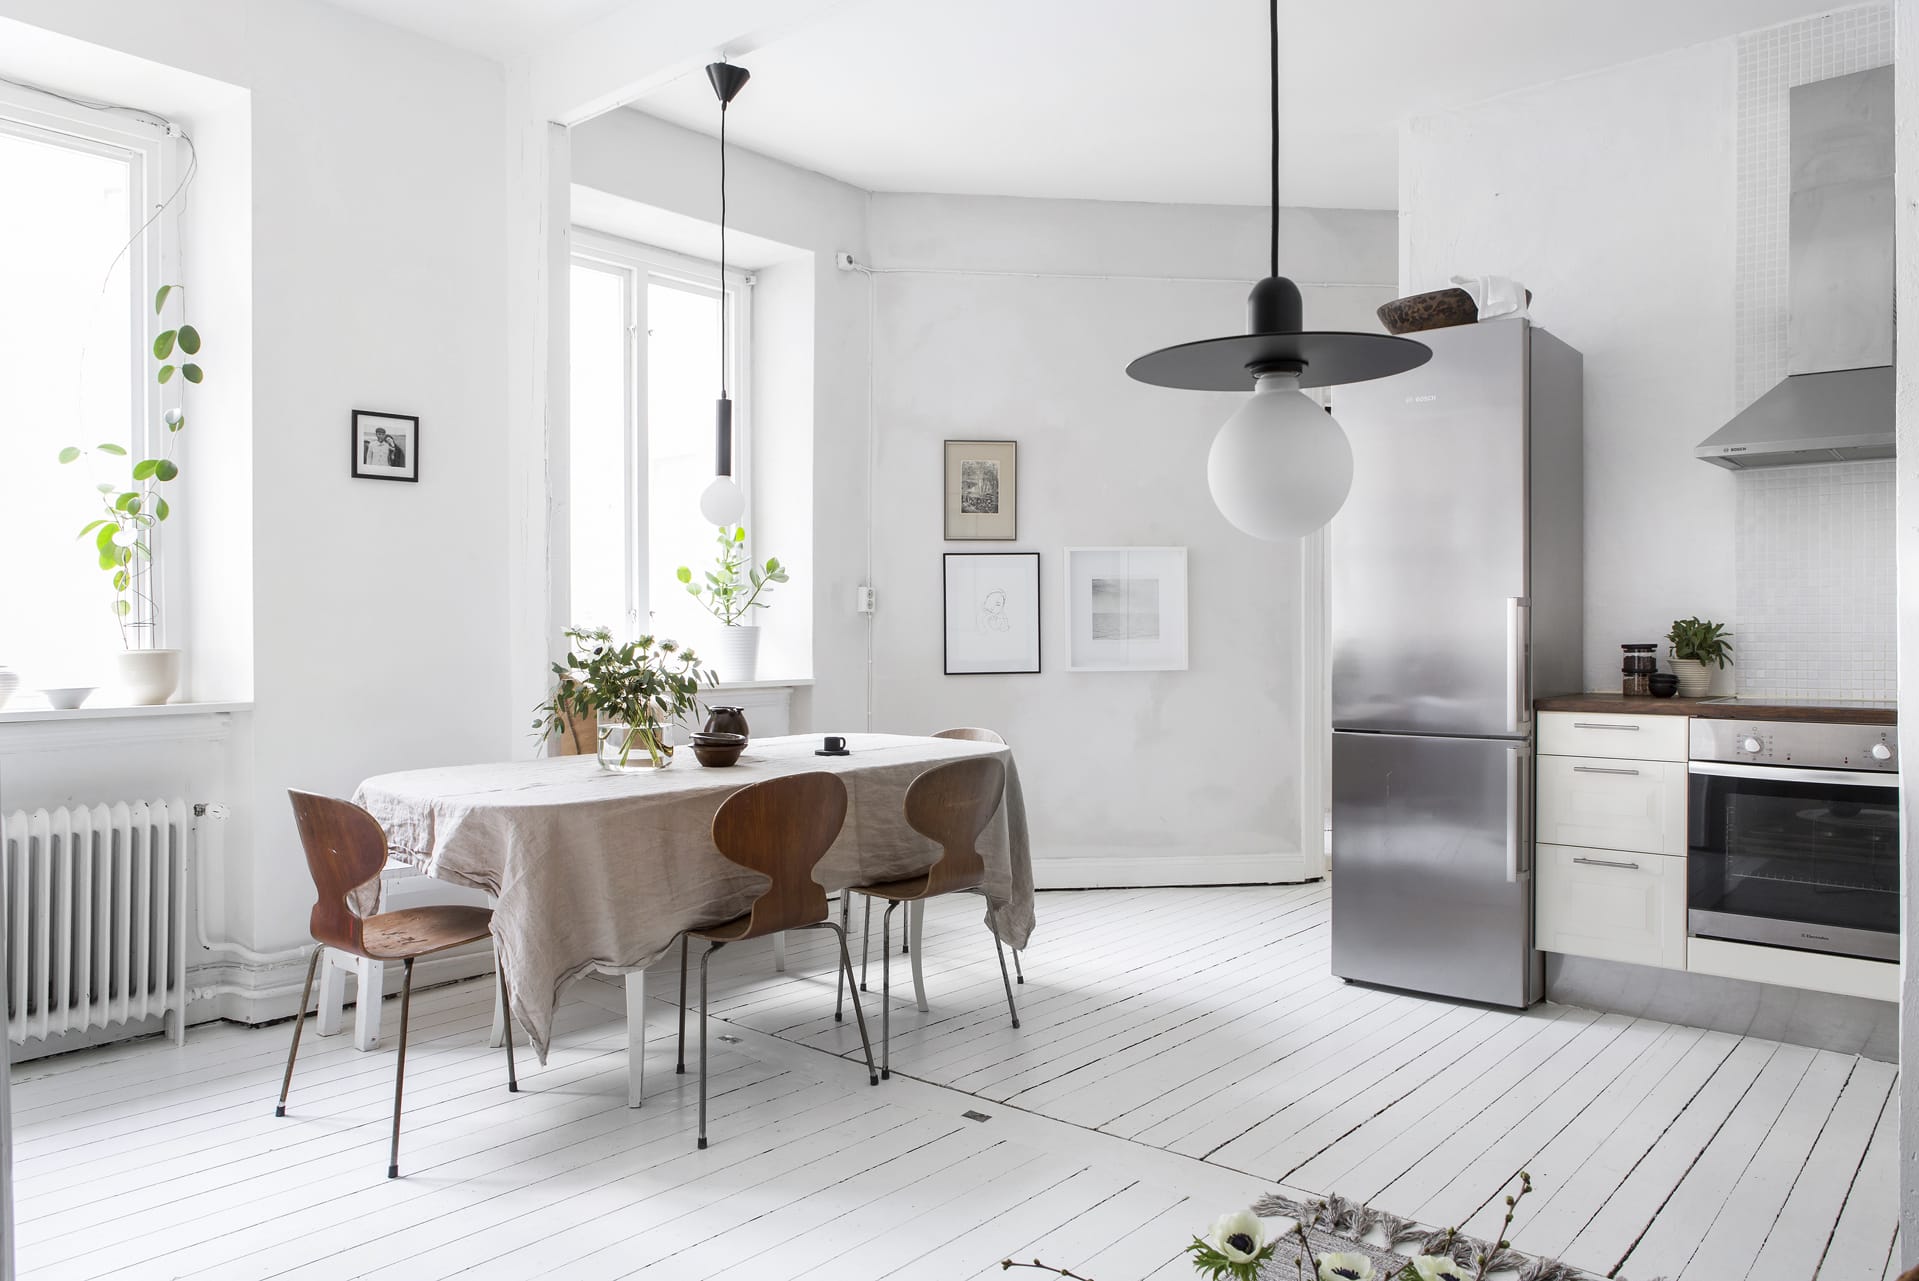 Bright white home decorated with natural tints - COCO LAPINE DESIGNCOCO ...